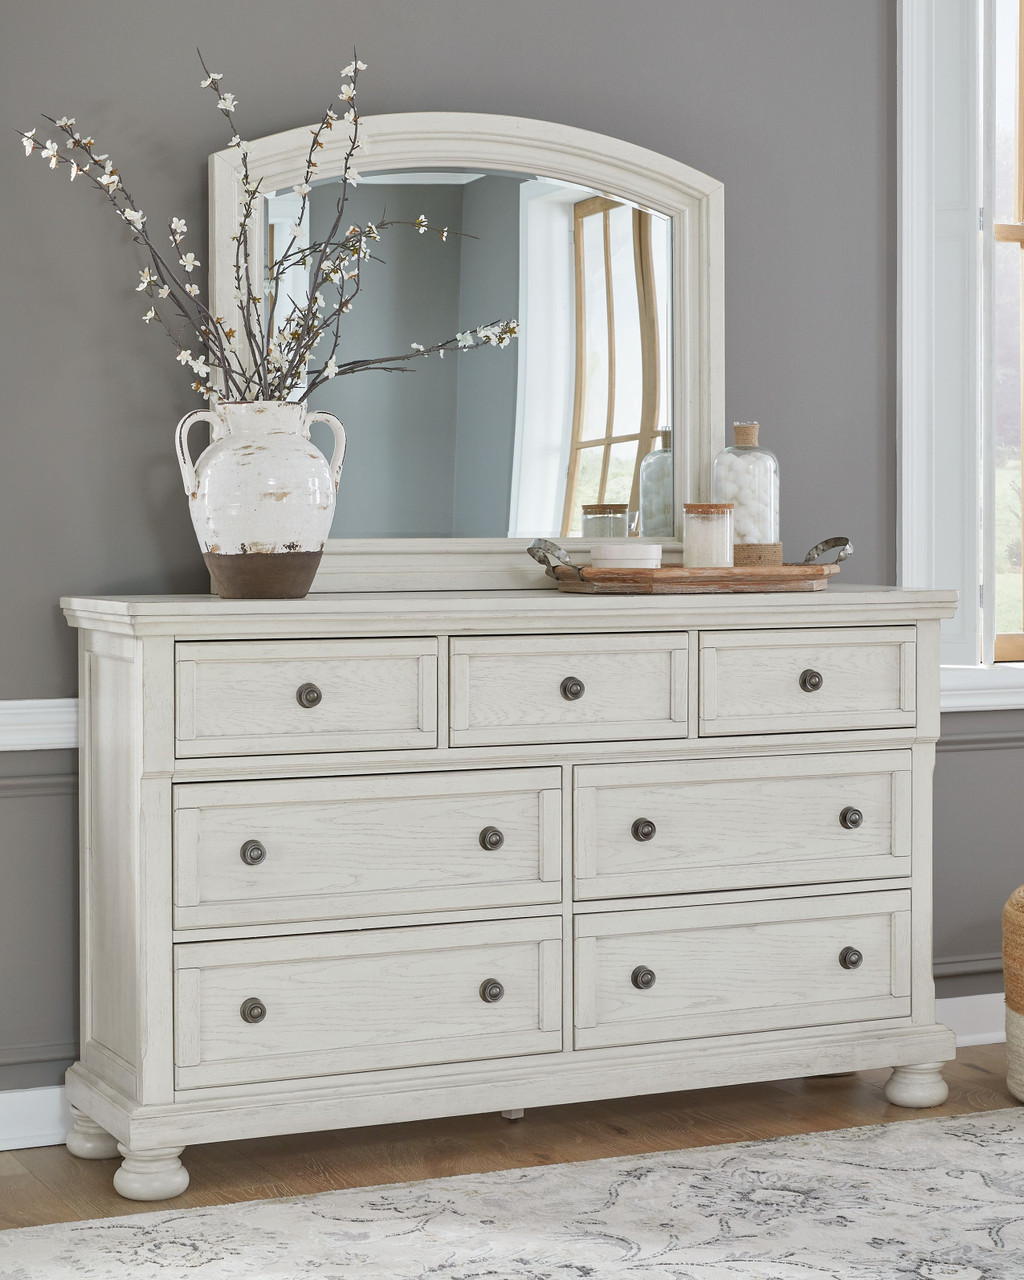 The Robbinsdale Antique White Dresser, Mirror is available at Complete  Suite Furniture, serving the Pacific Northwest.